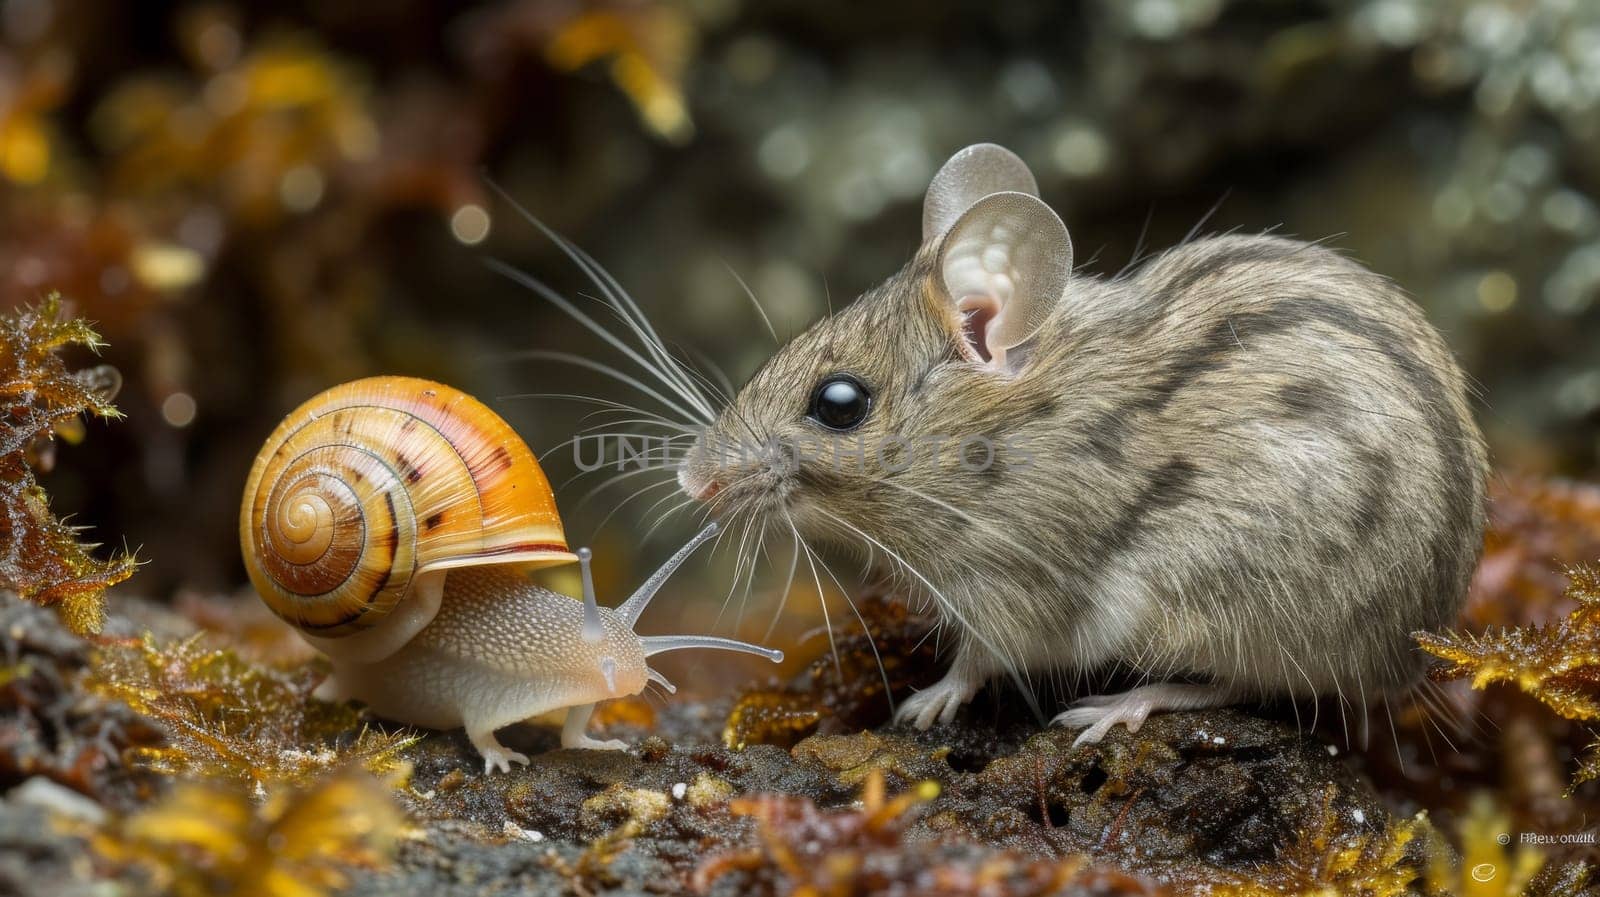 A mouse and a snail are in the same area